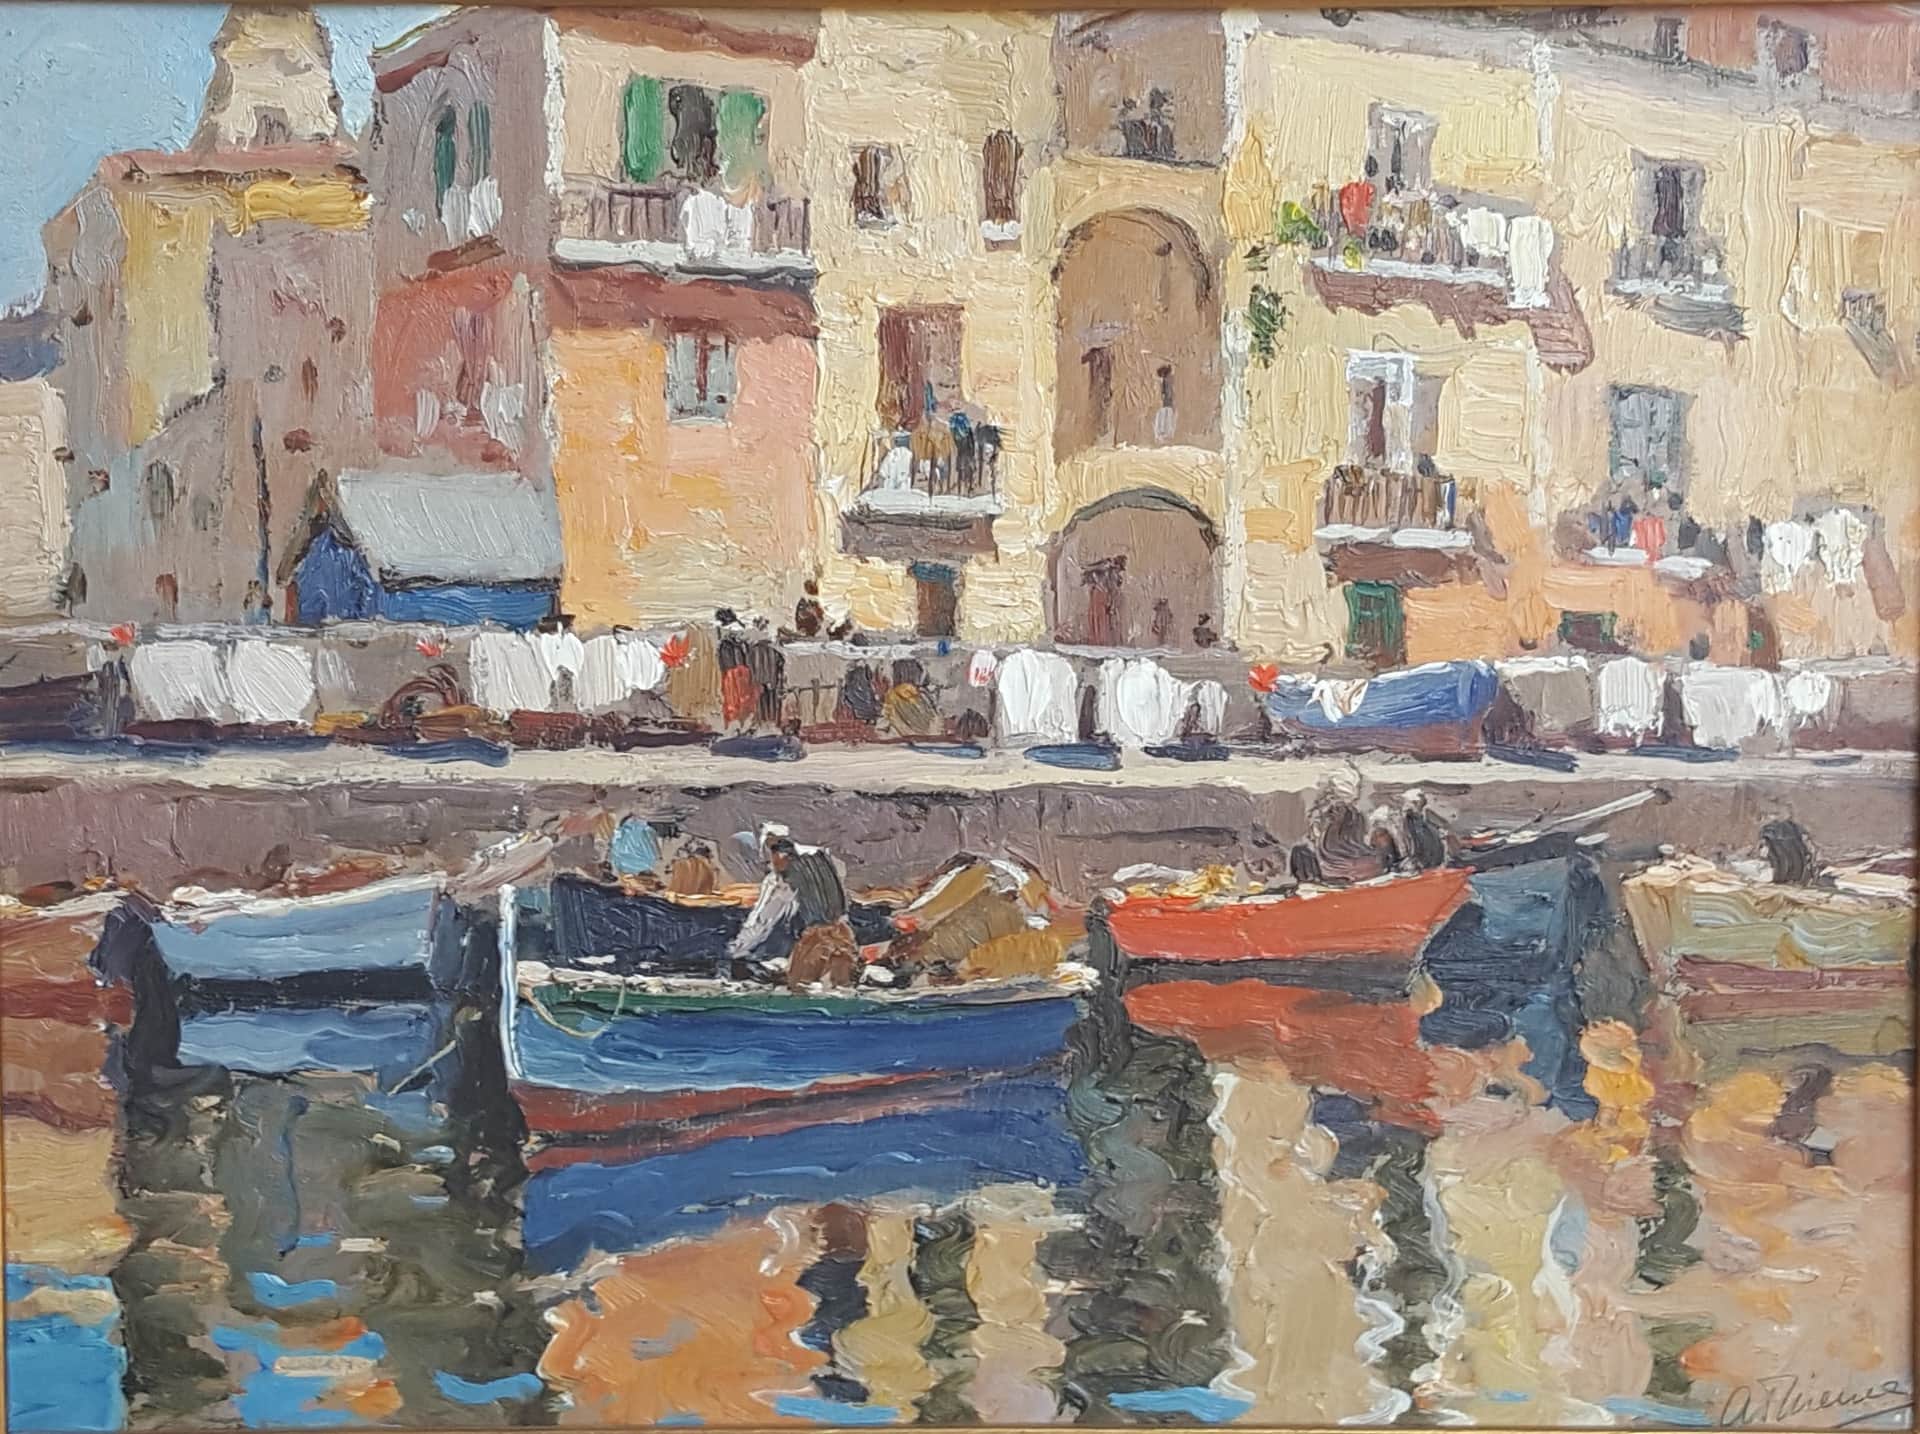 Anthony Thieme's Chioggia Canal Scene. A Canal in Venice, with gondoliers at work. Laundry dries in the open air behind them. The light refracts accurately in the water, which is perhaps the painting's greatest appeal